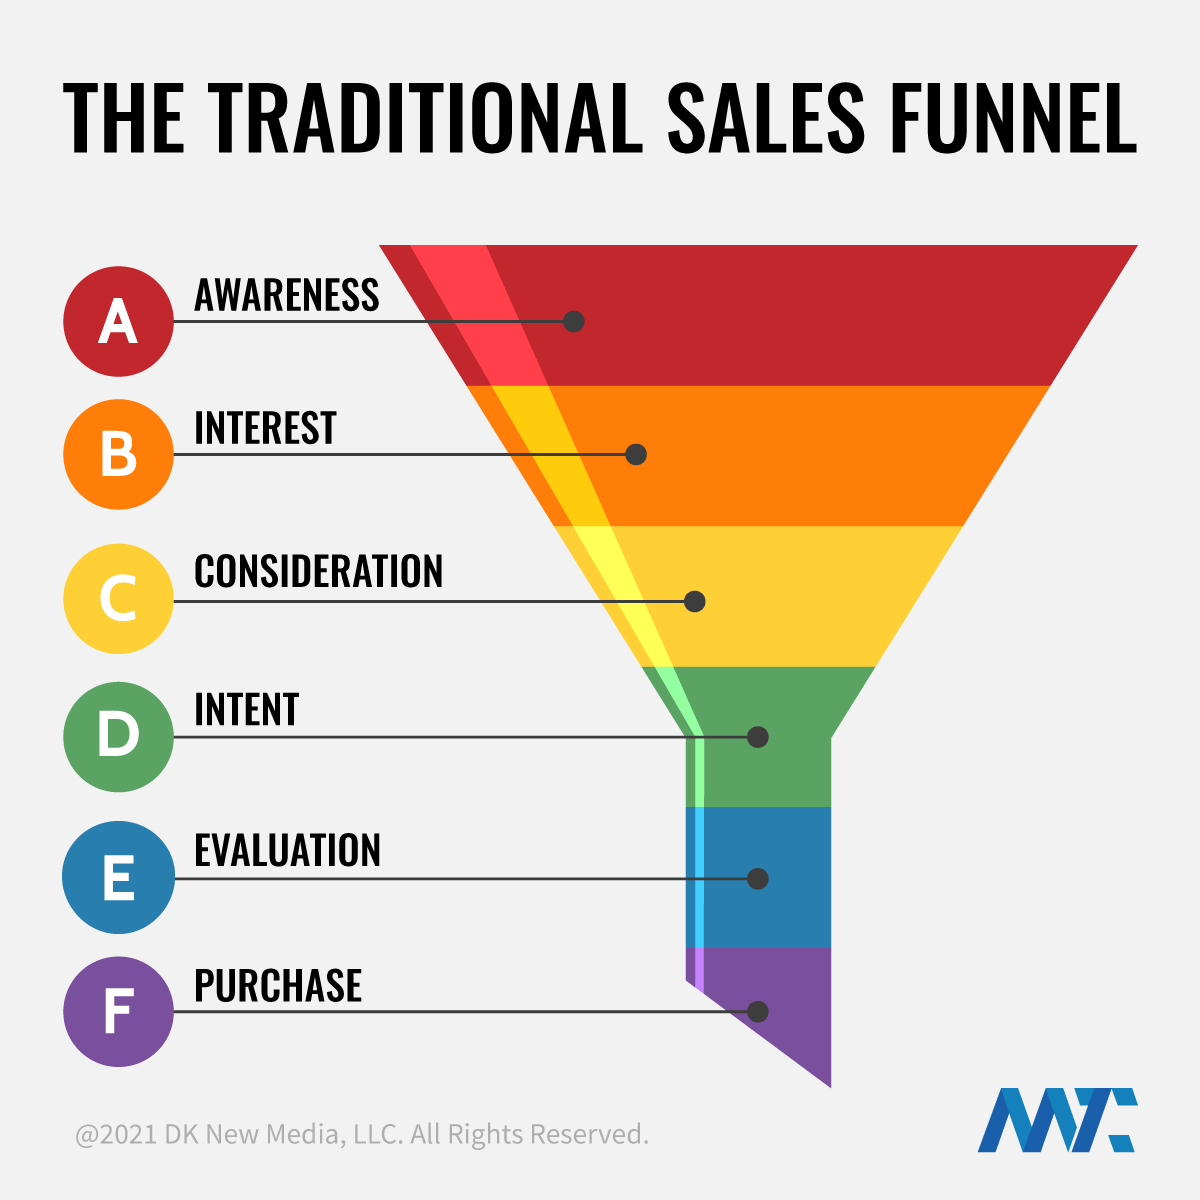 A full funnel marketing example with 6 stages.